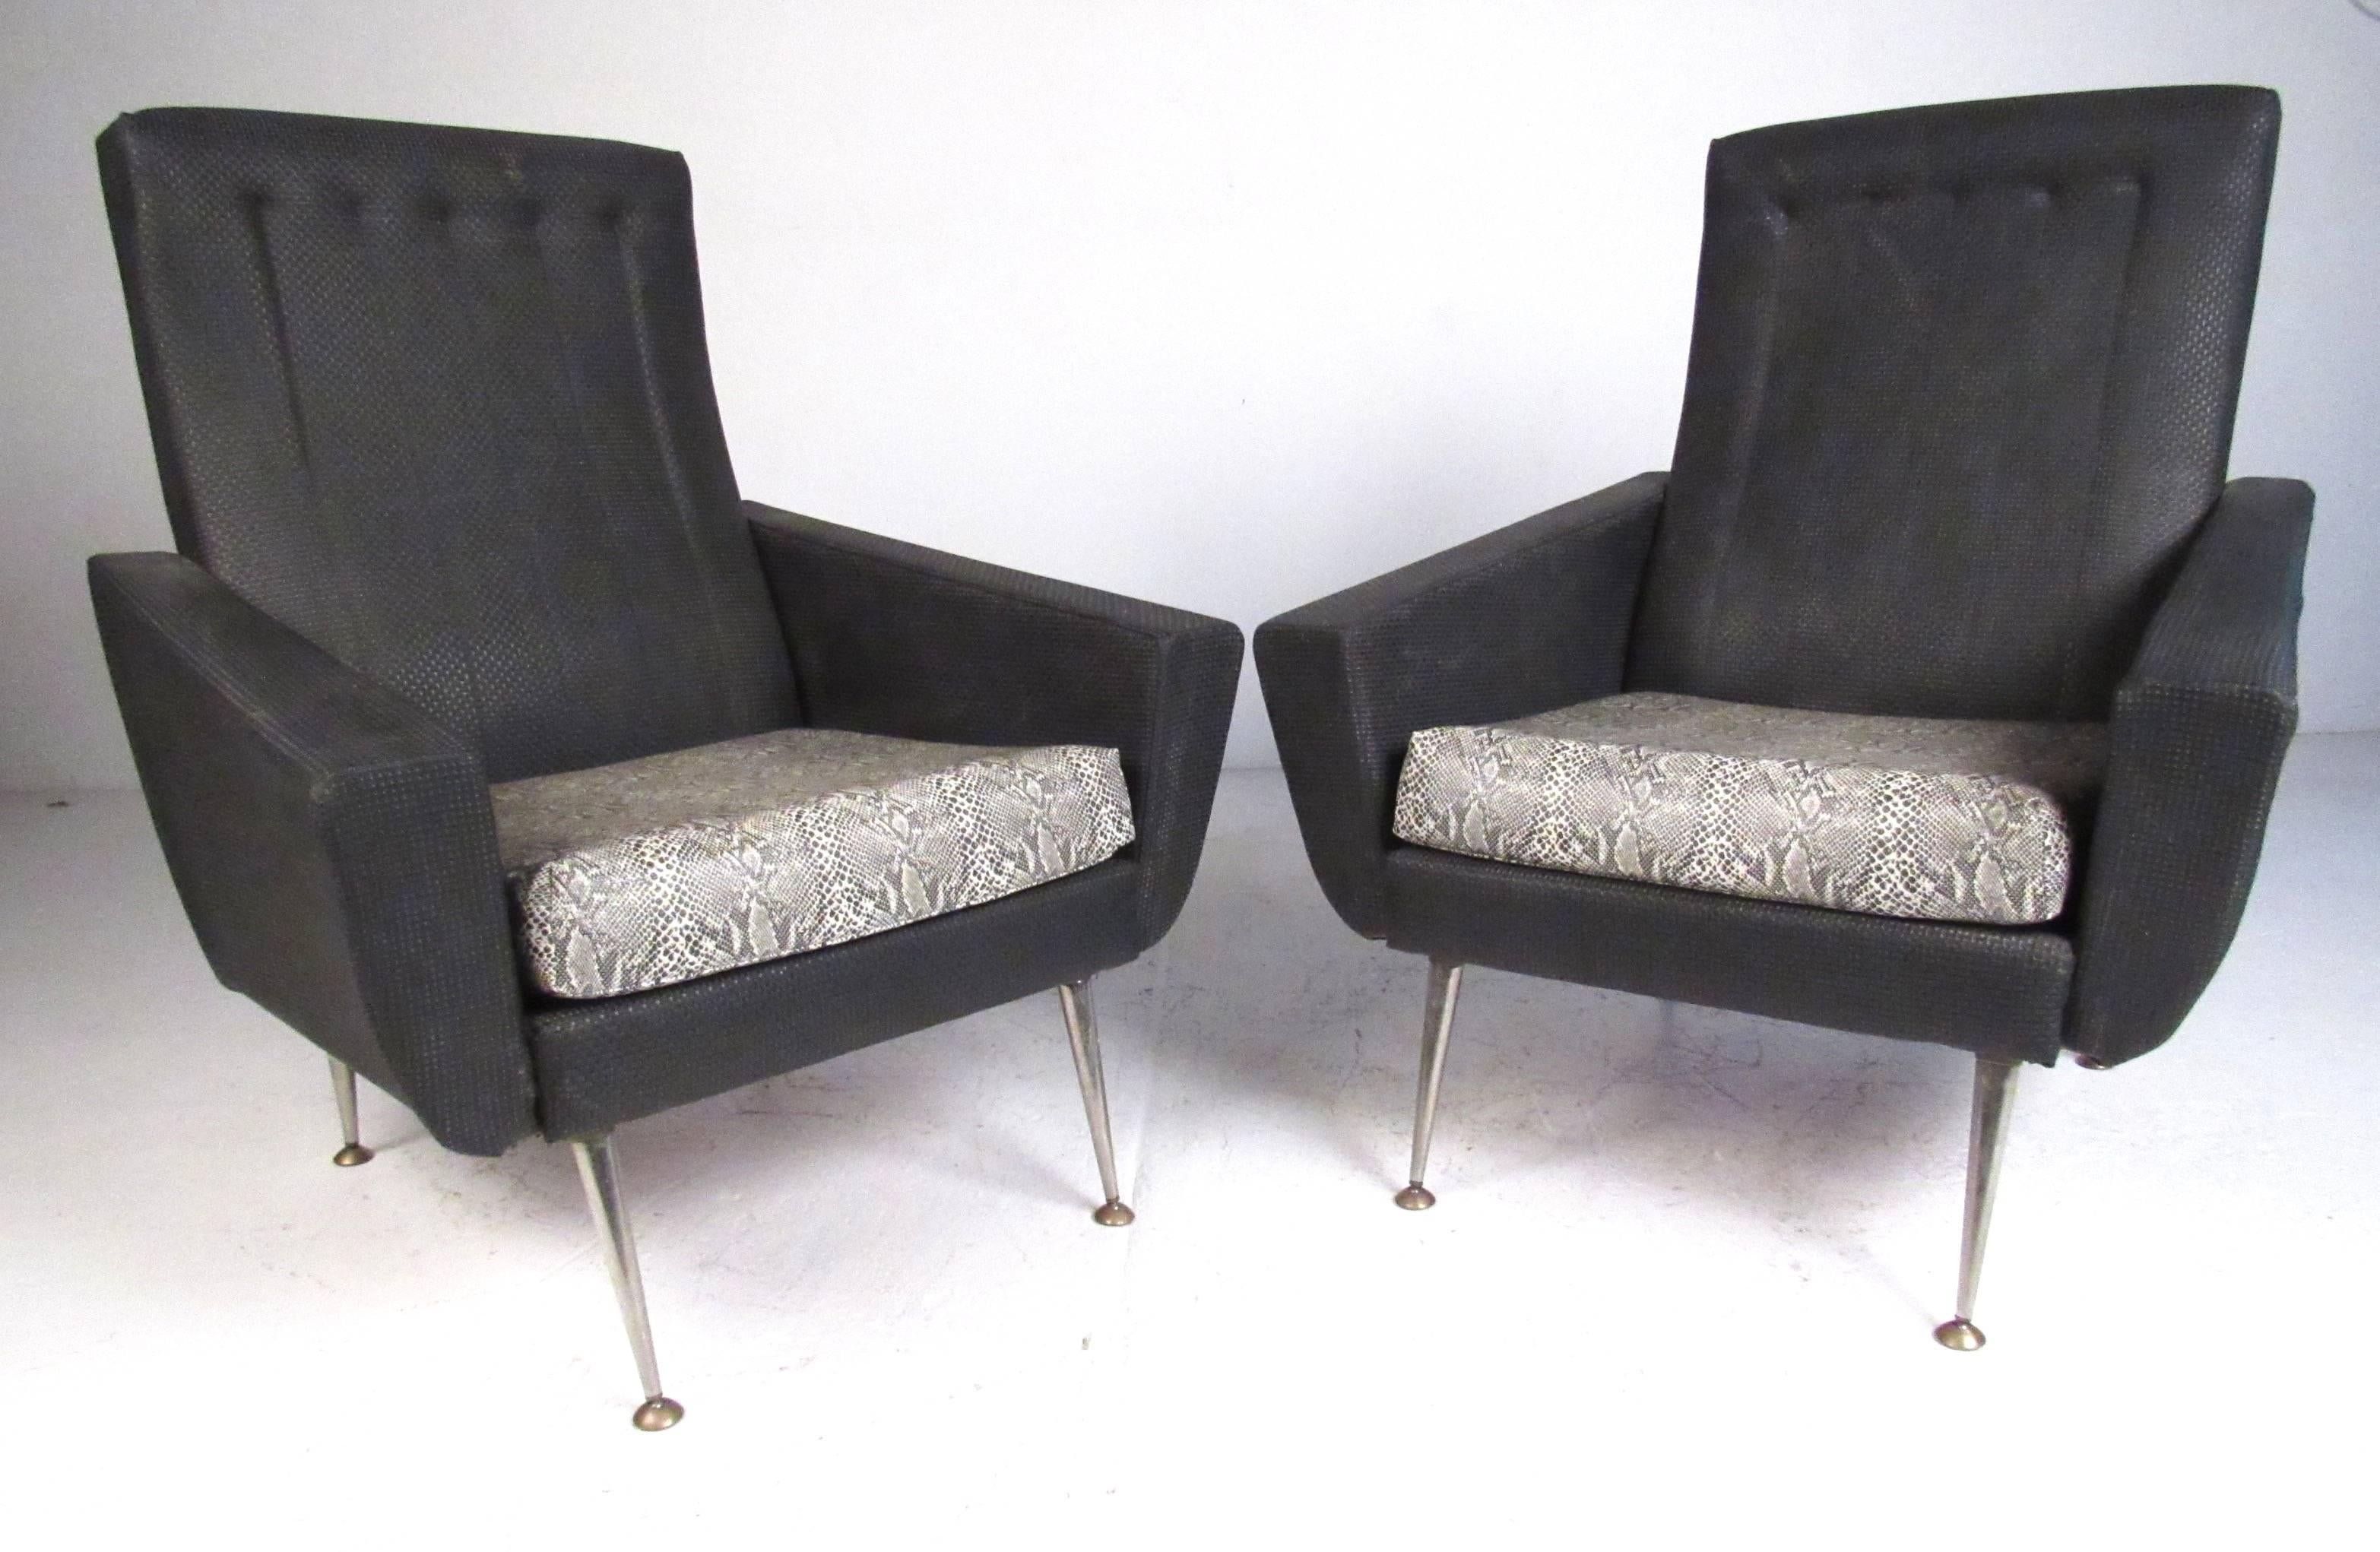 Generously proportioned pair of vintage high back lounge chairs in the manner of Gio Ponti. Covered in a woven/textured black vinyl upholstery with chrome tapered legs with brass foot pads. Please confirm item location (NY or NJ) with dealer.